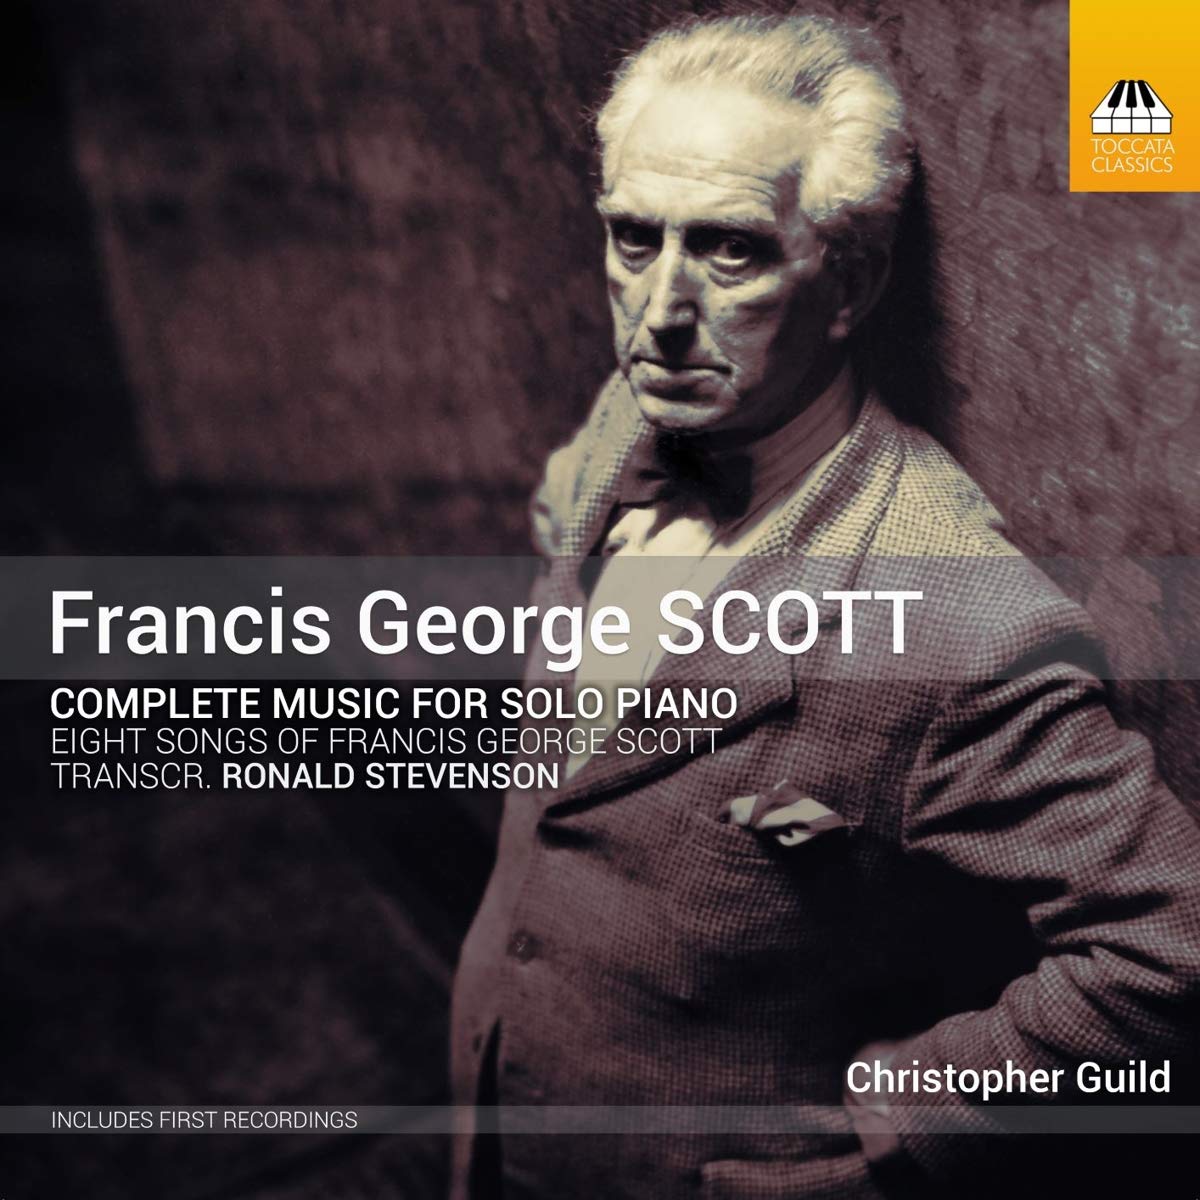 Christopher Guild - Francis George Scott - Complete Music for Solo Piano (2021) [FLAC 24bit/96kHz]